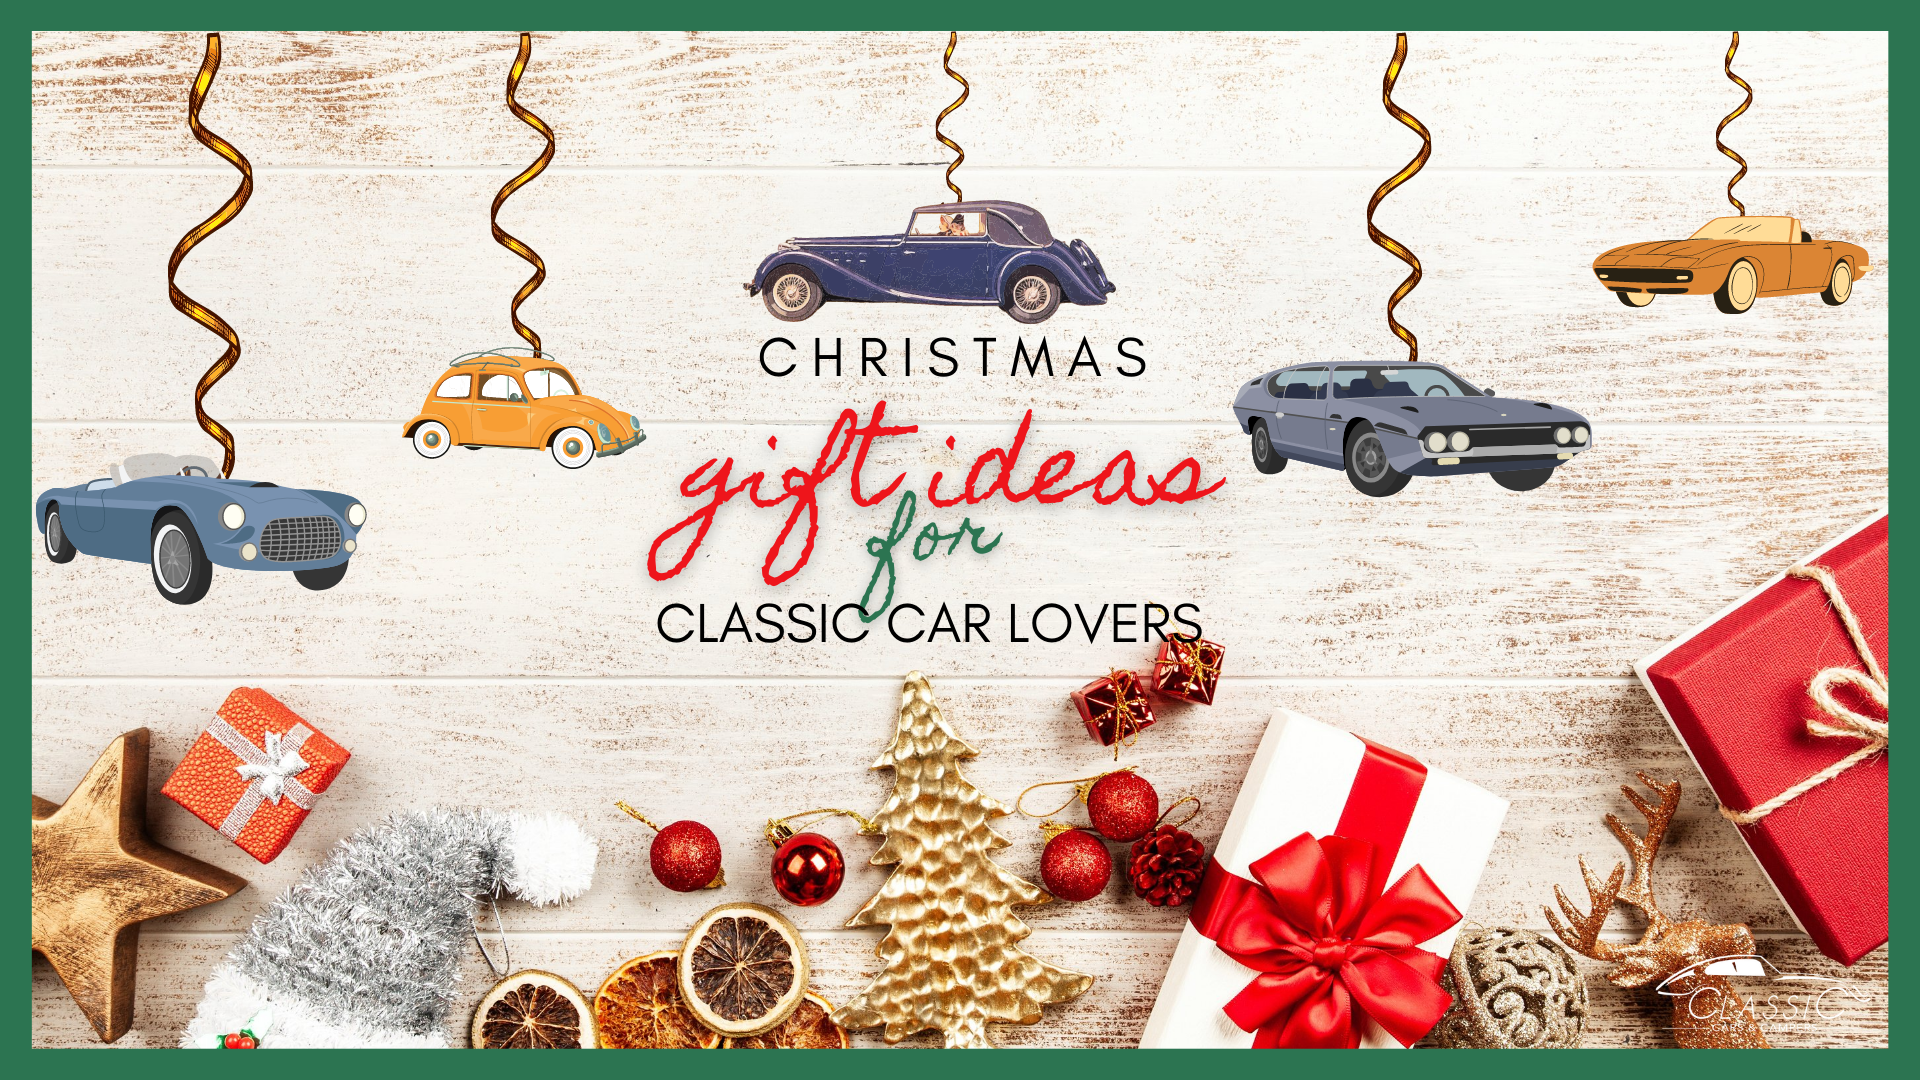 Christmas Gift Ideas for Classic Car Lover s